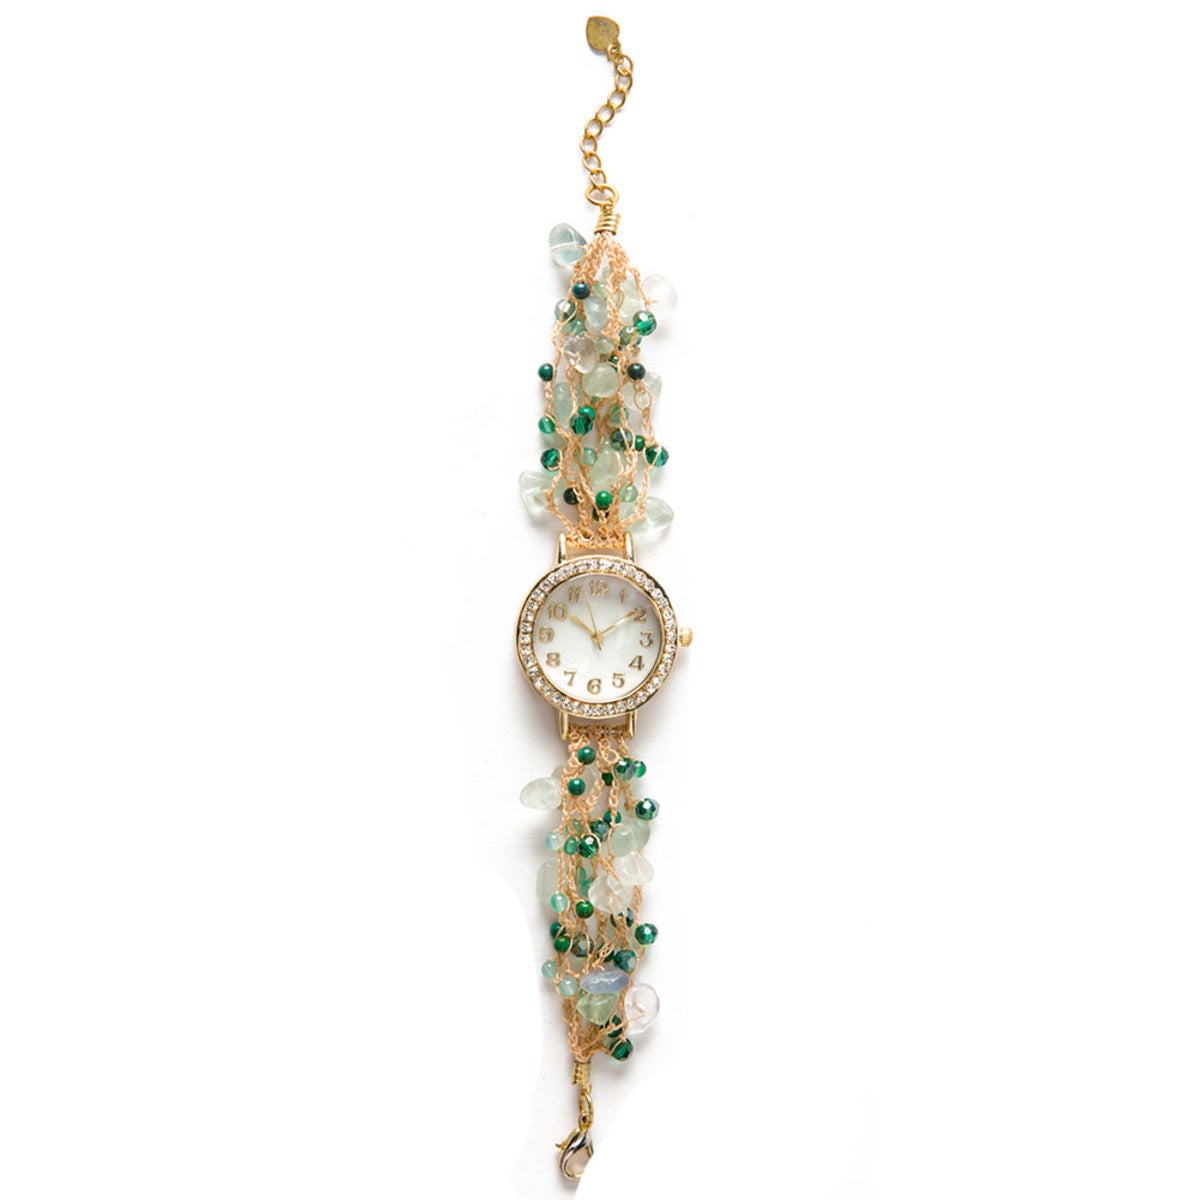 Hand-Beaded Agate And Pearl Watch - Green